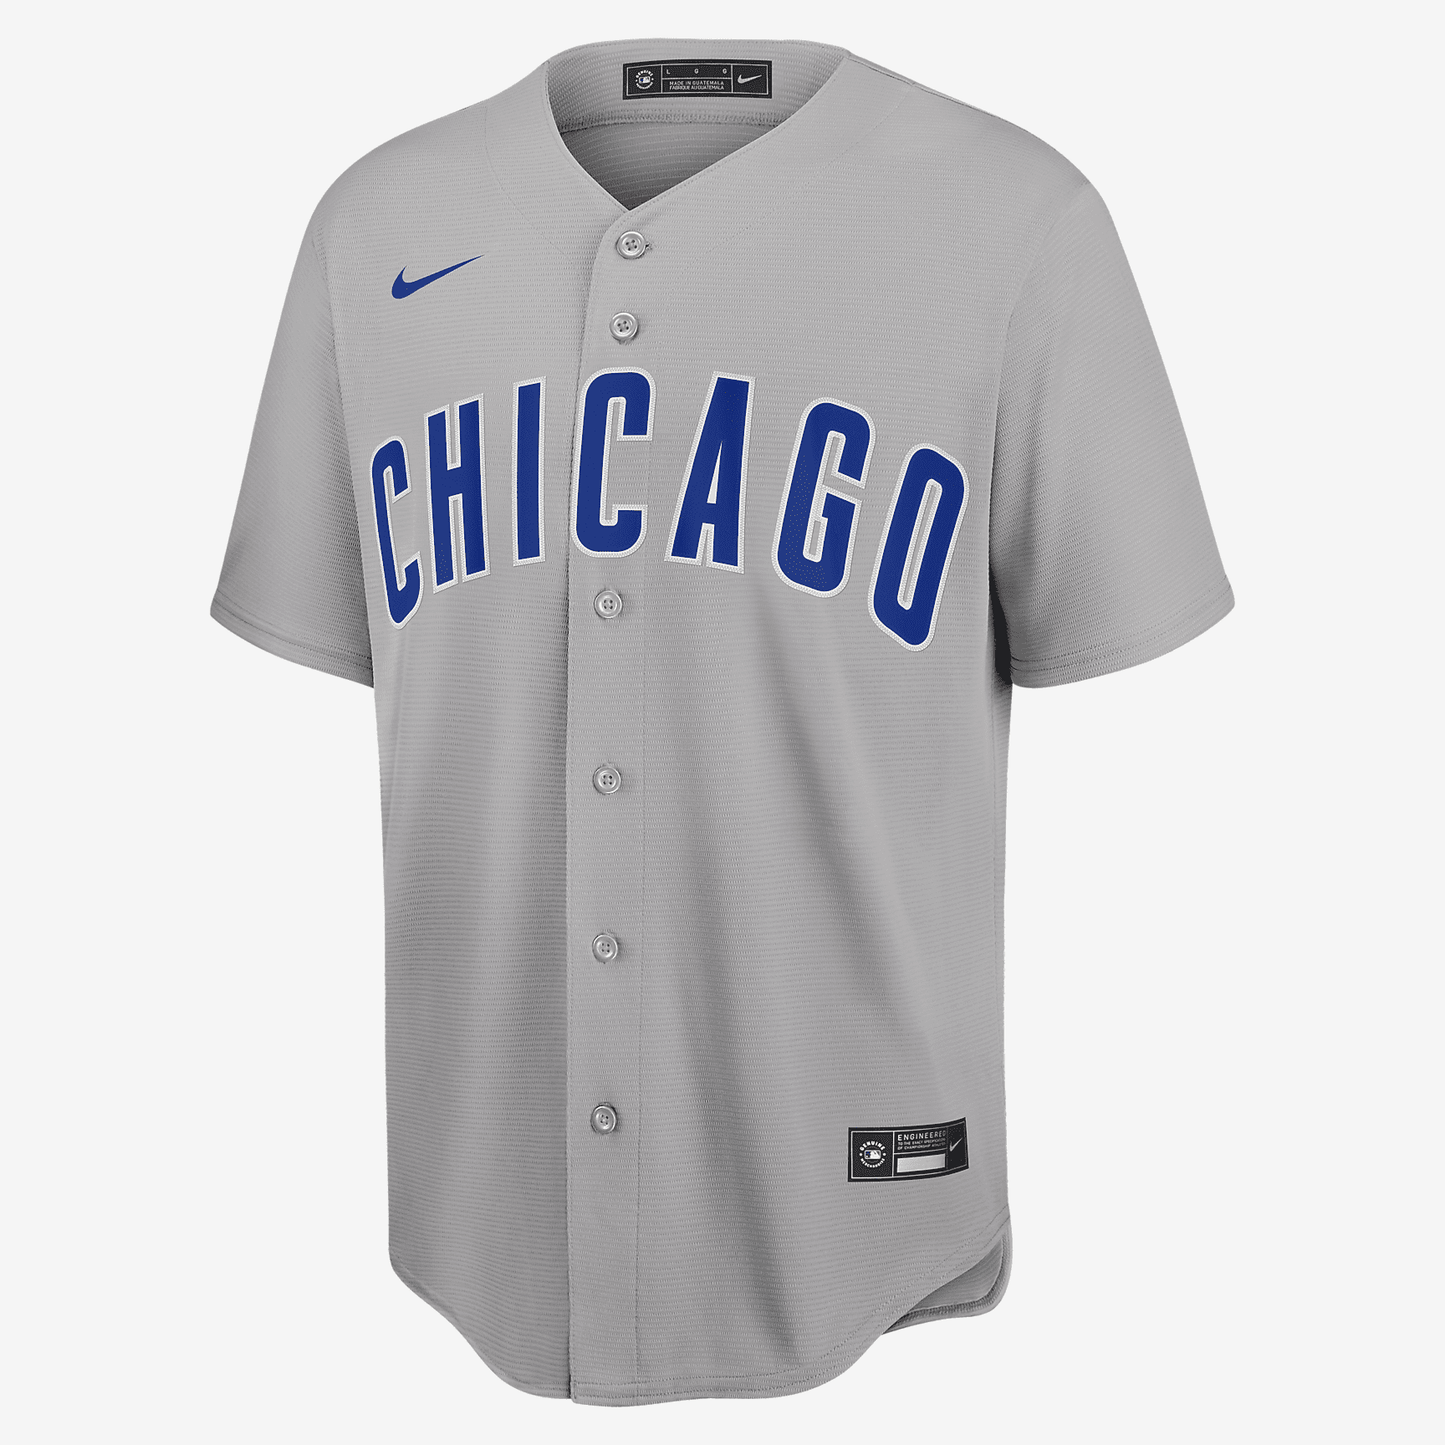 MLB Chicago Cubs (Anthony Rizzo) Men's Replica Baseball Jersey - Base Grey